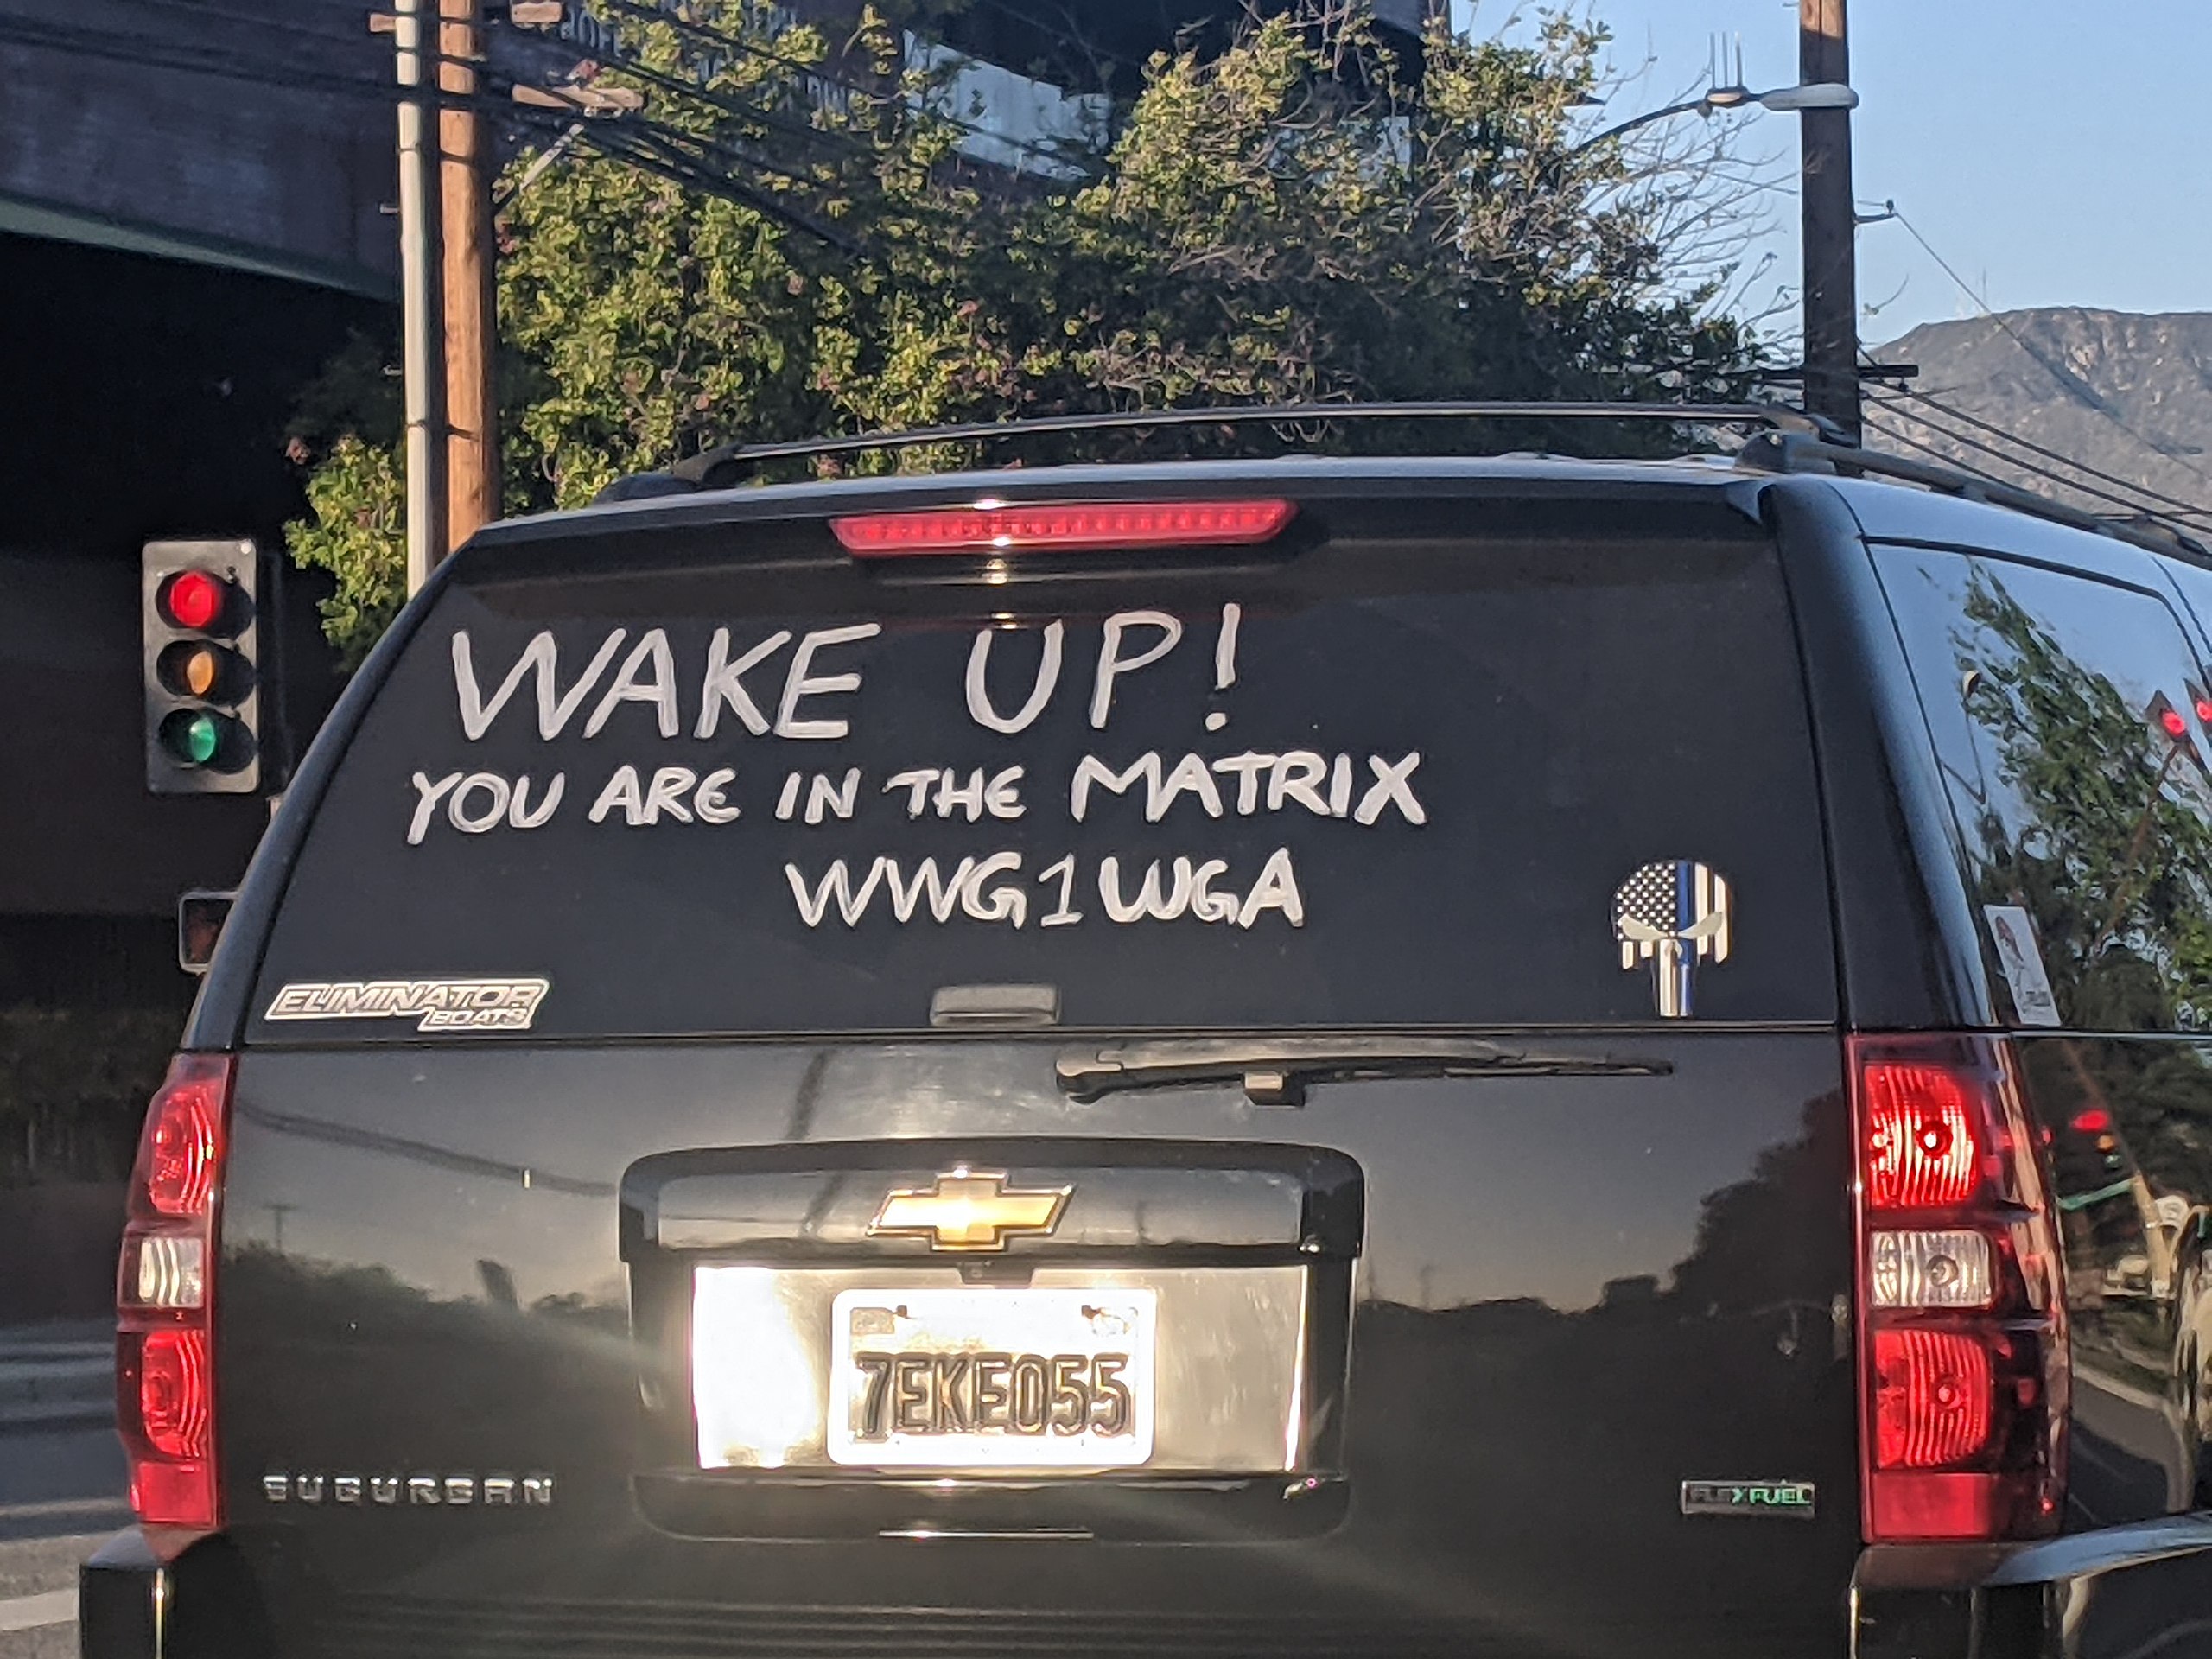 A van with a sign that says wake up, inducing paranoia as it hints at the idea of being trapped in the matrix.